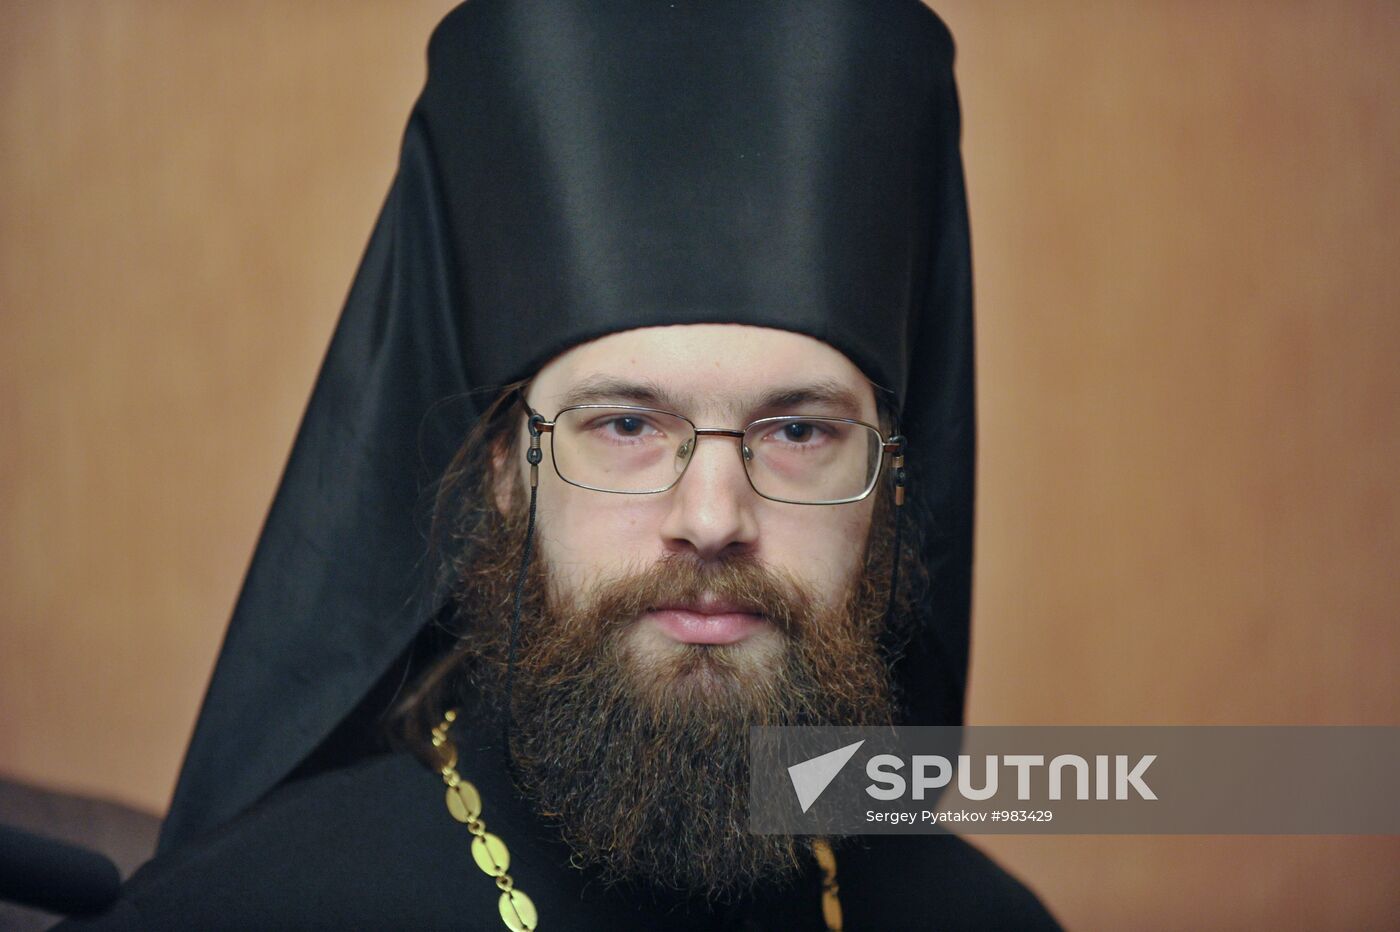 Vice Chancellor of the Moscow Patriarchate, Savva